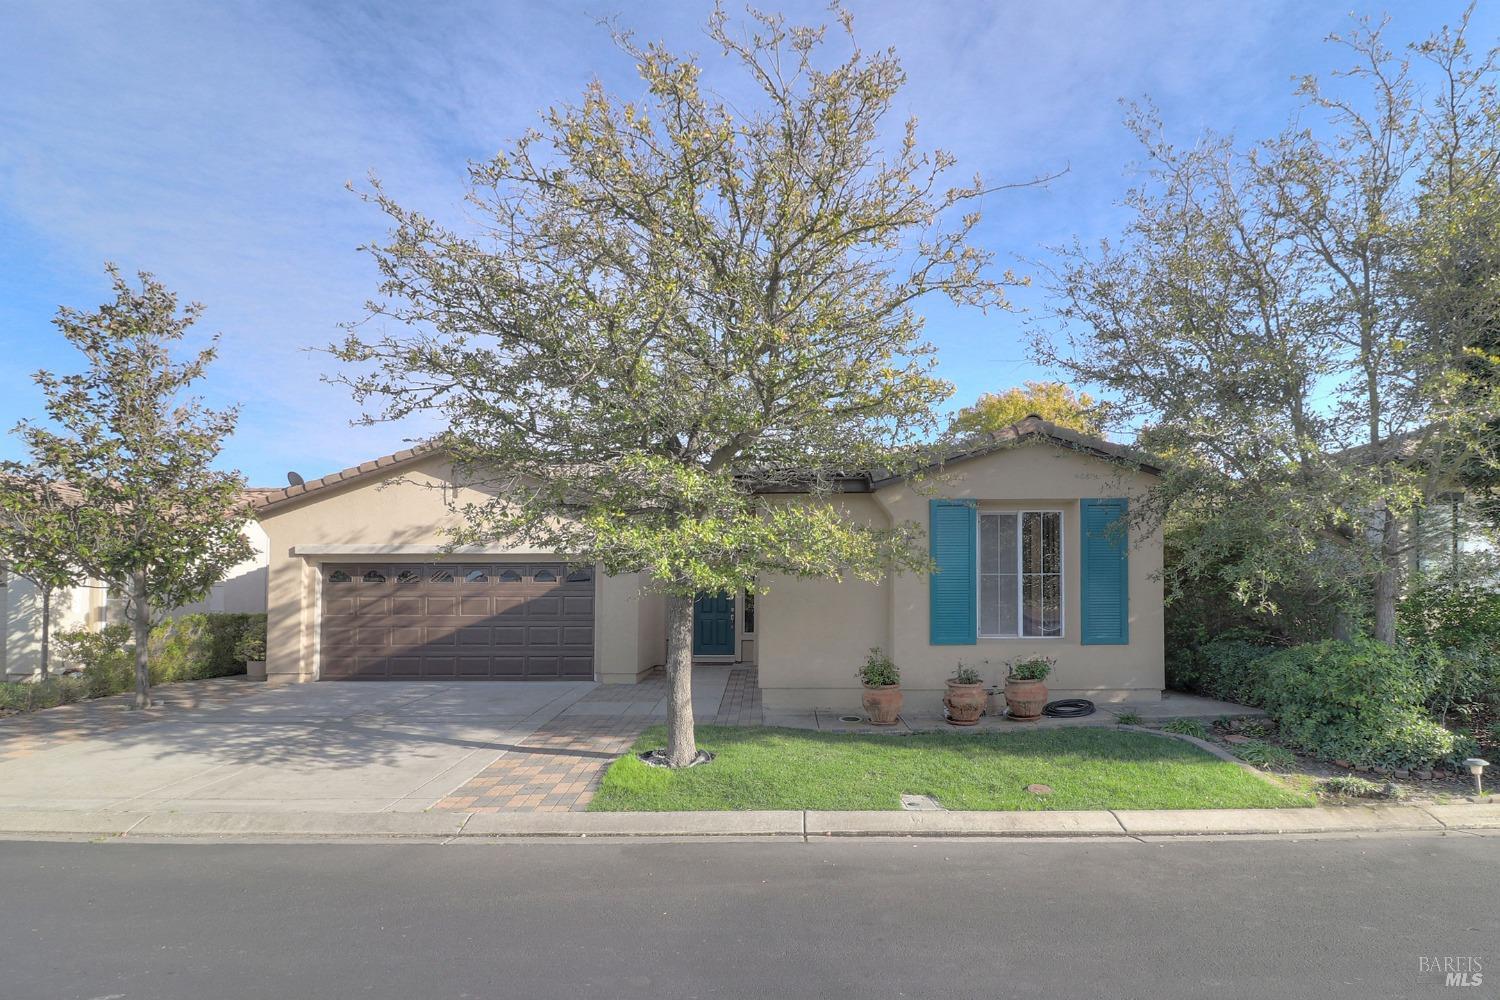 Photo of 303 Southern Hills Dr in Rio Vista, CA